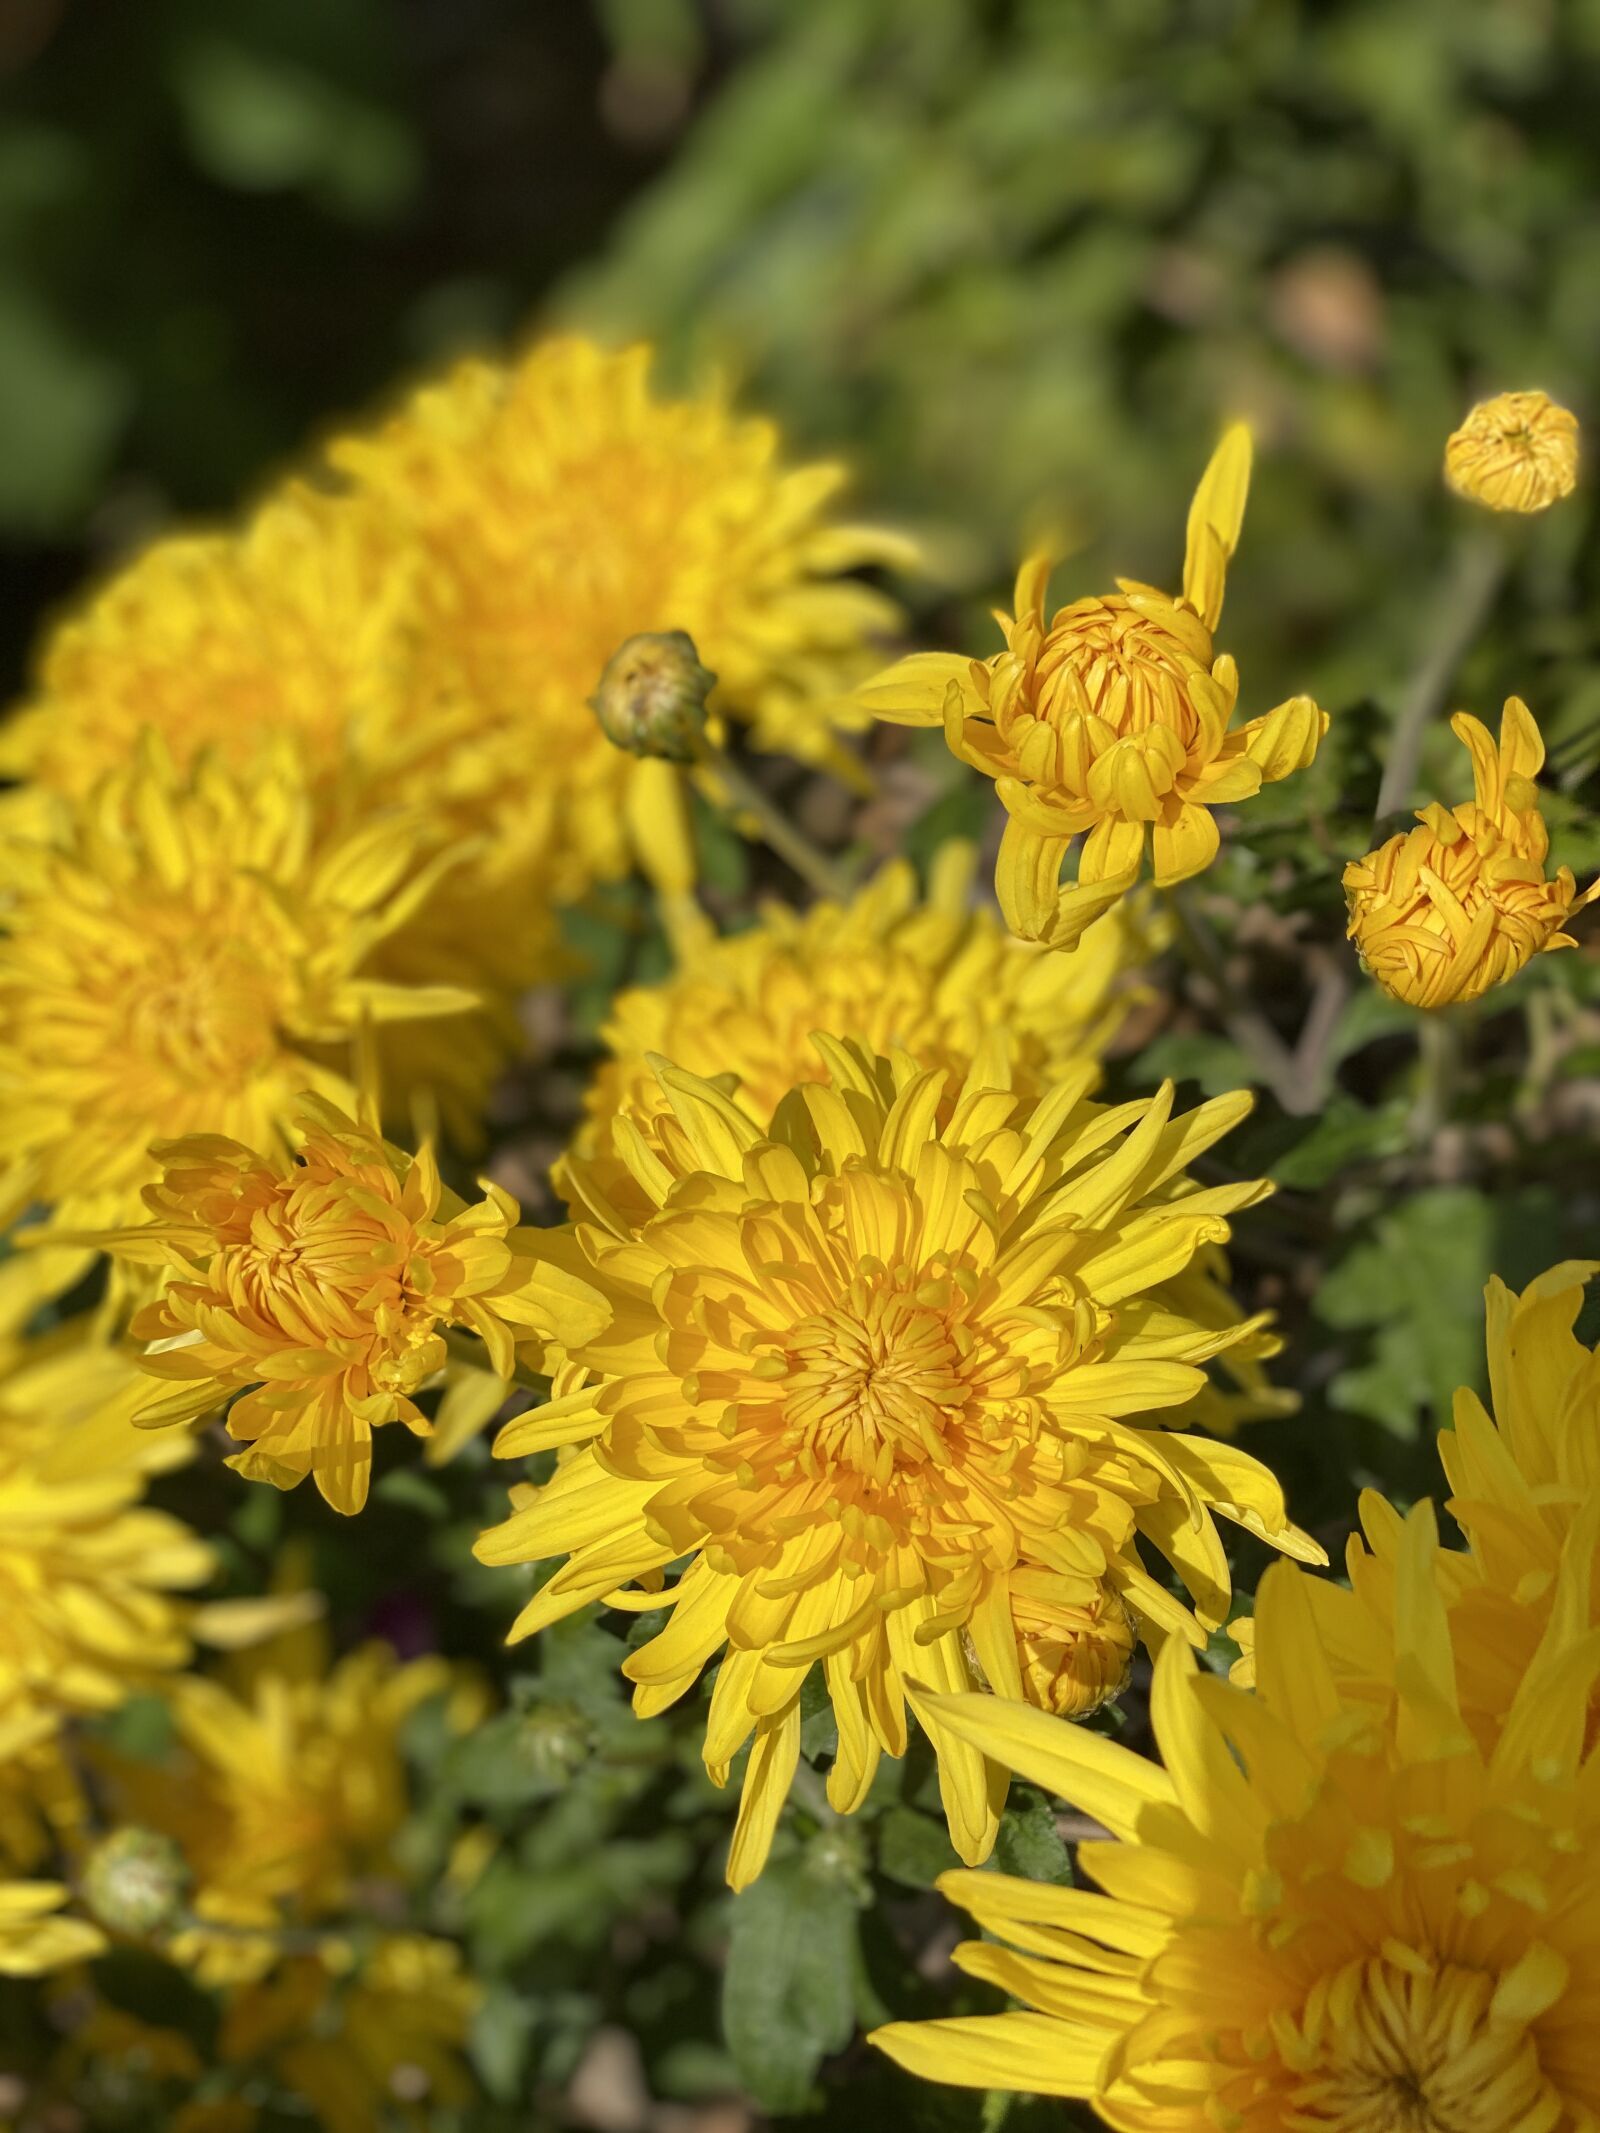 iPhone 11 Pro Max back dual camera 6mm f/2 sample photo. Chrysanthemums, fall colors, fall photography